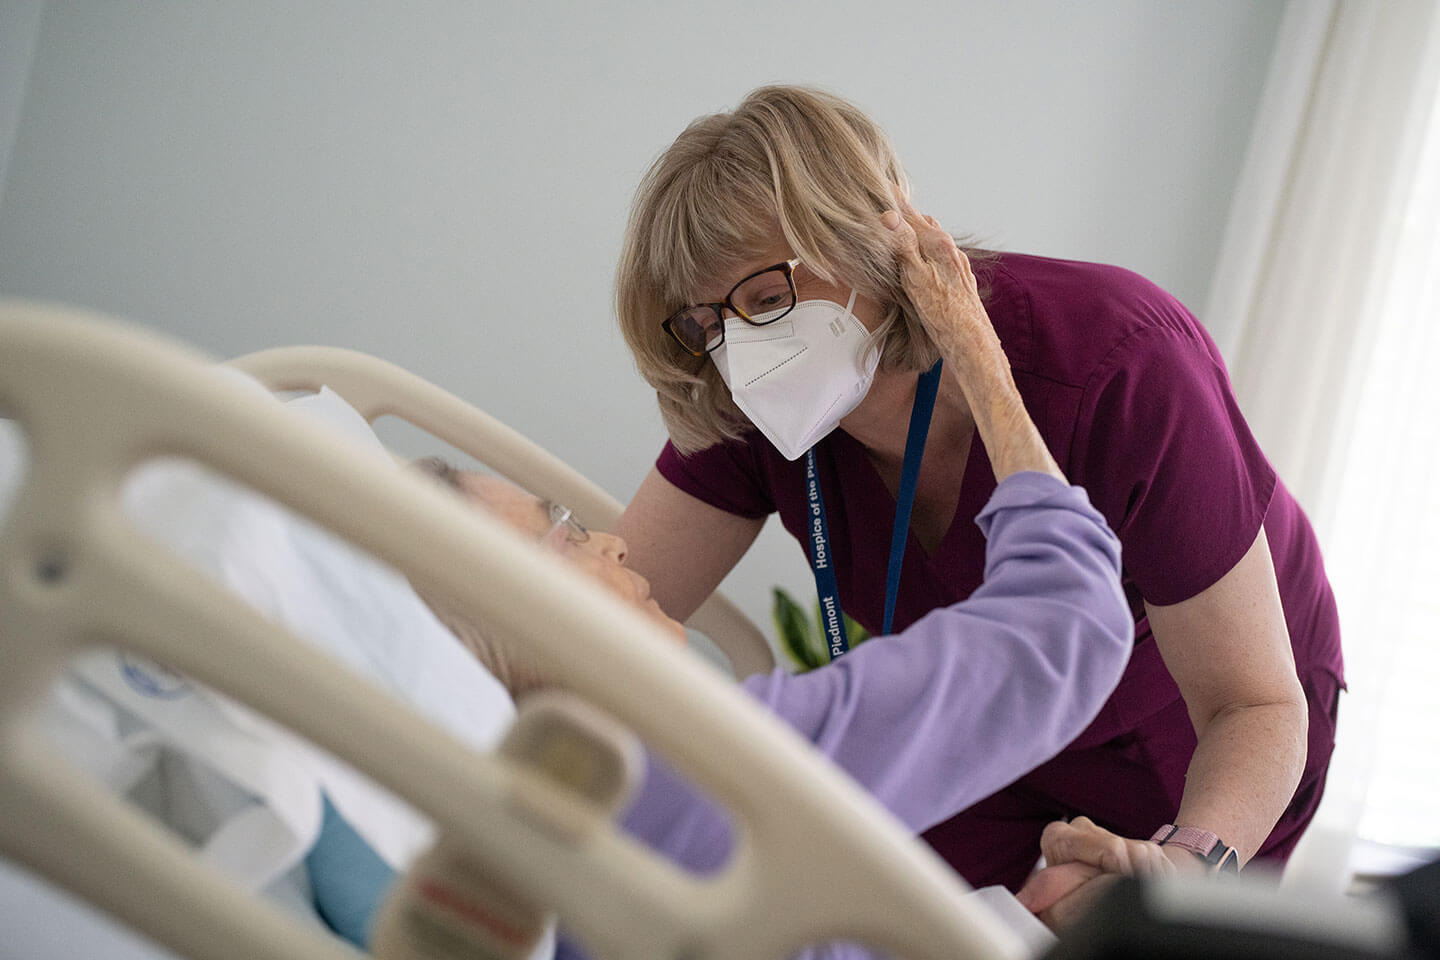 Hospice nurse wearing a mask reaching down to a patient in her bed who is wrapping her arm around the nurse's neck